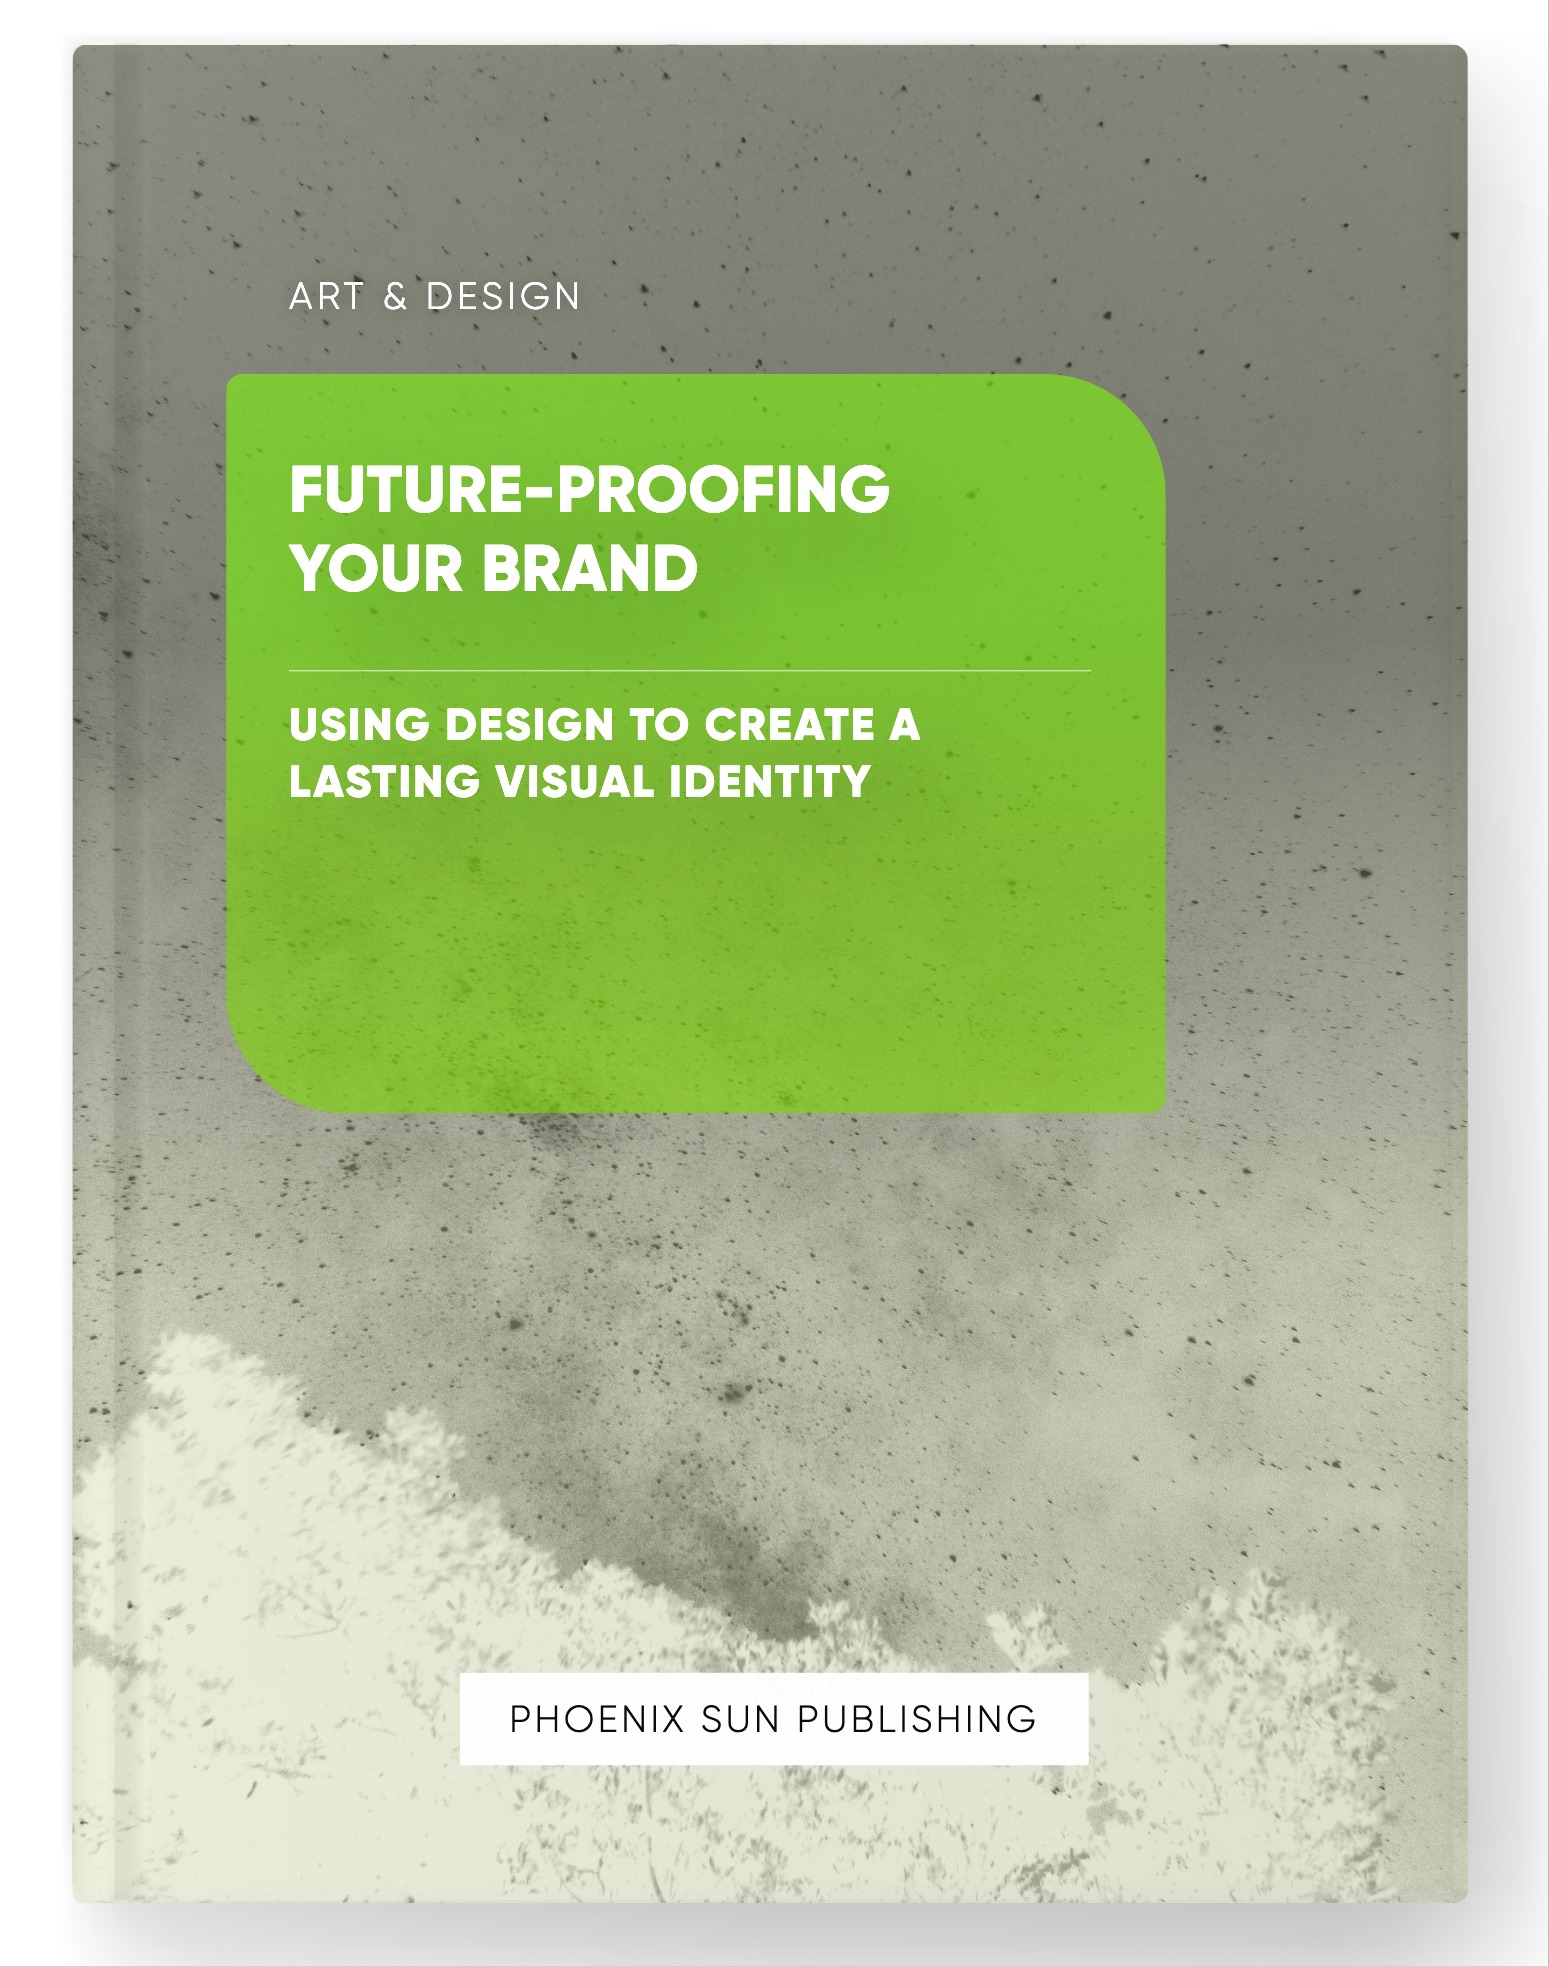 Future-Proofing Your Brand – Using Design to Create a Lasting Visual Identity